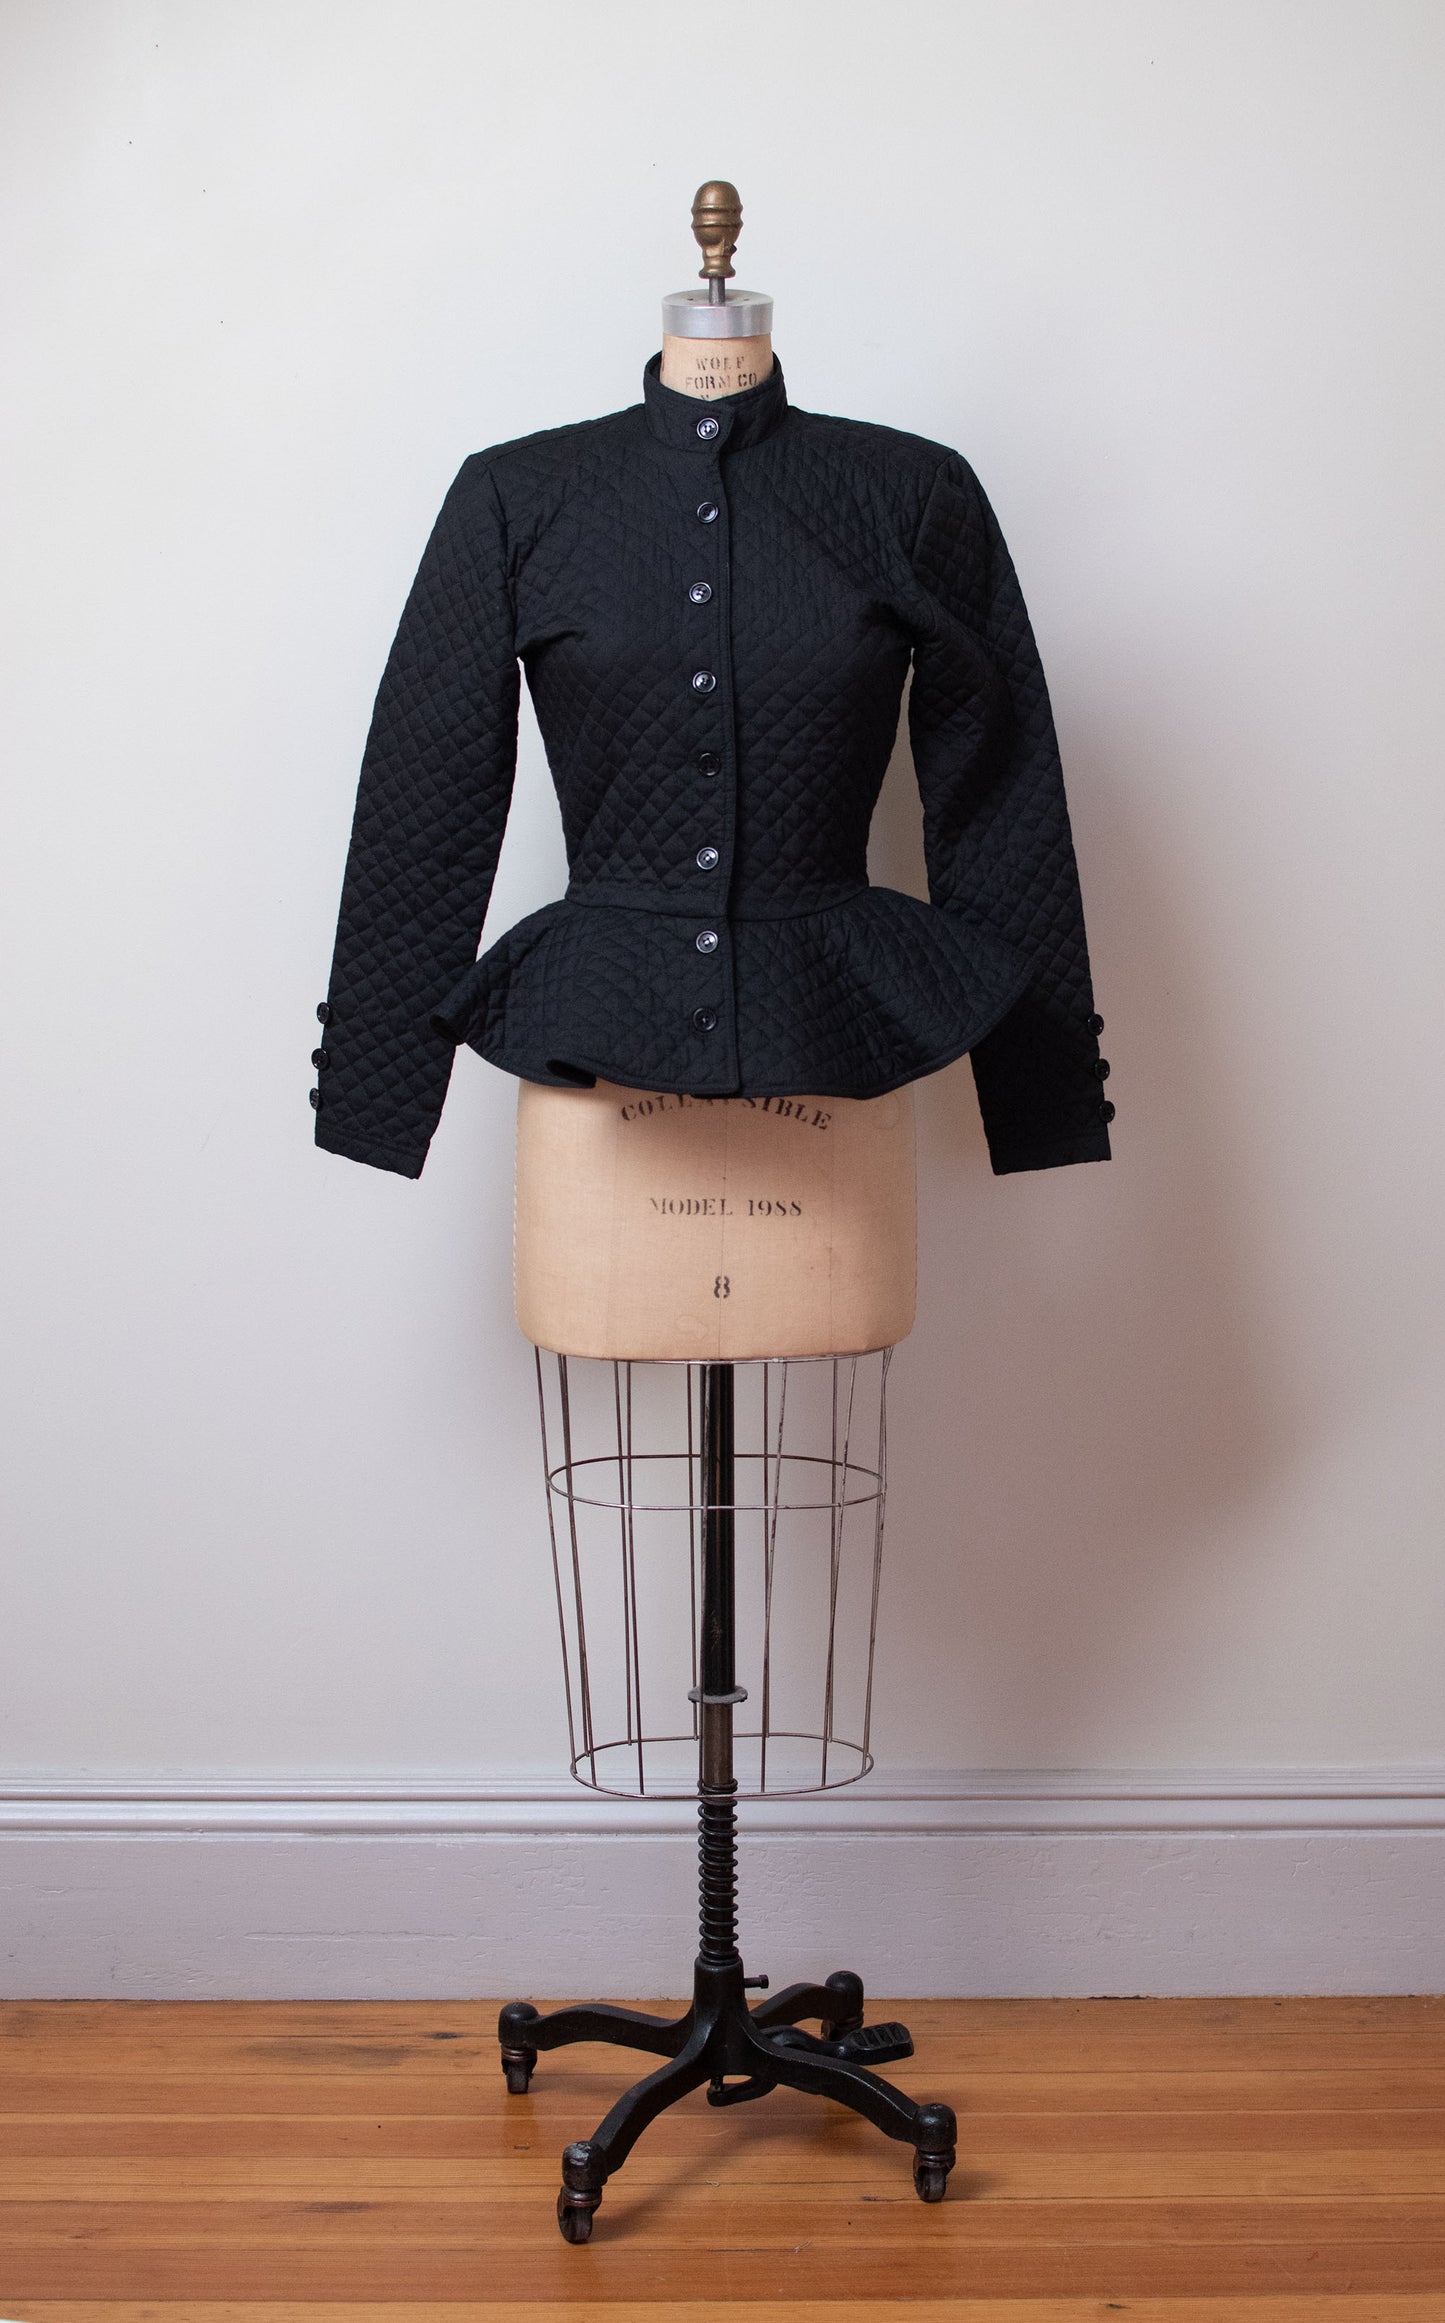 1980s Quilted Peplum Jacket | Betsey Johnson Punk Label